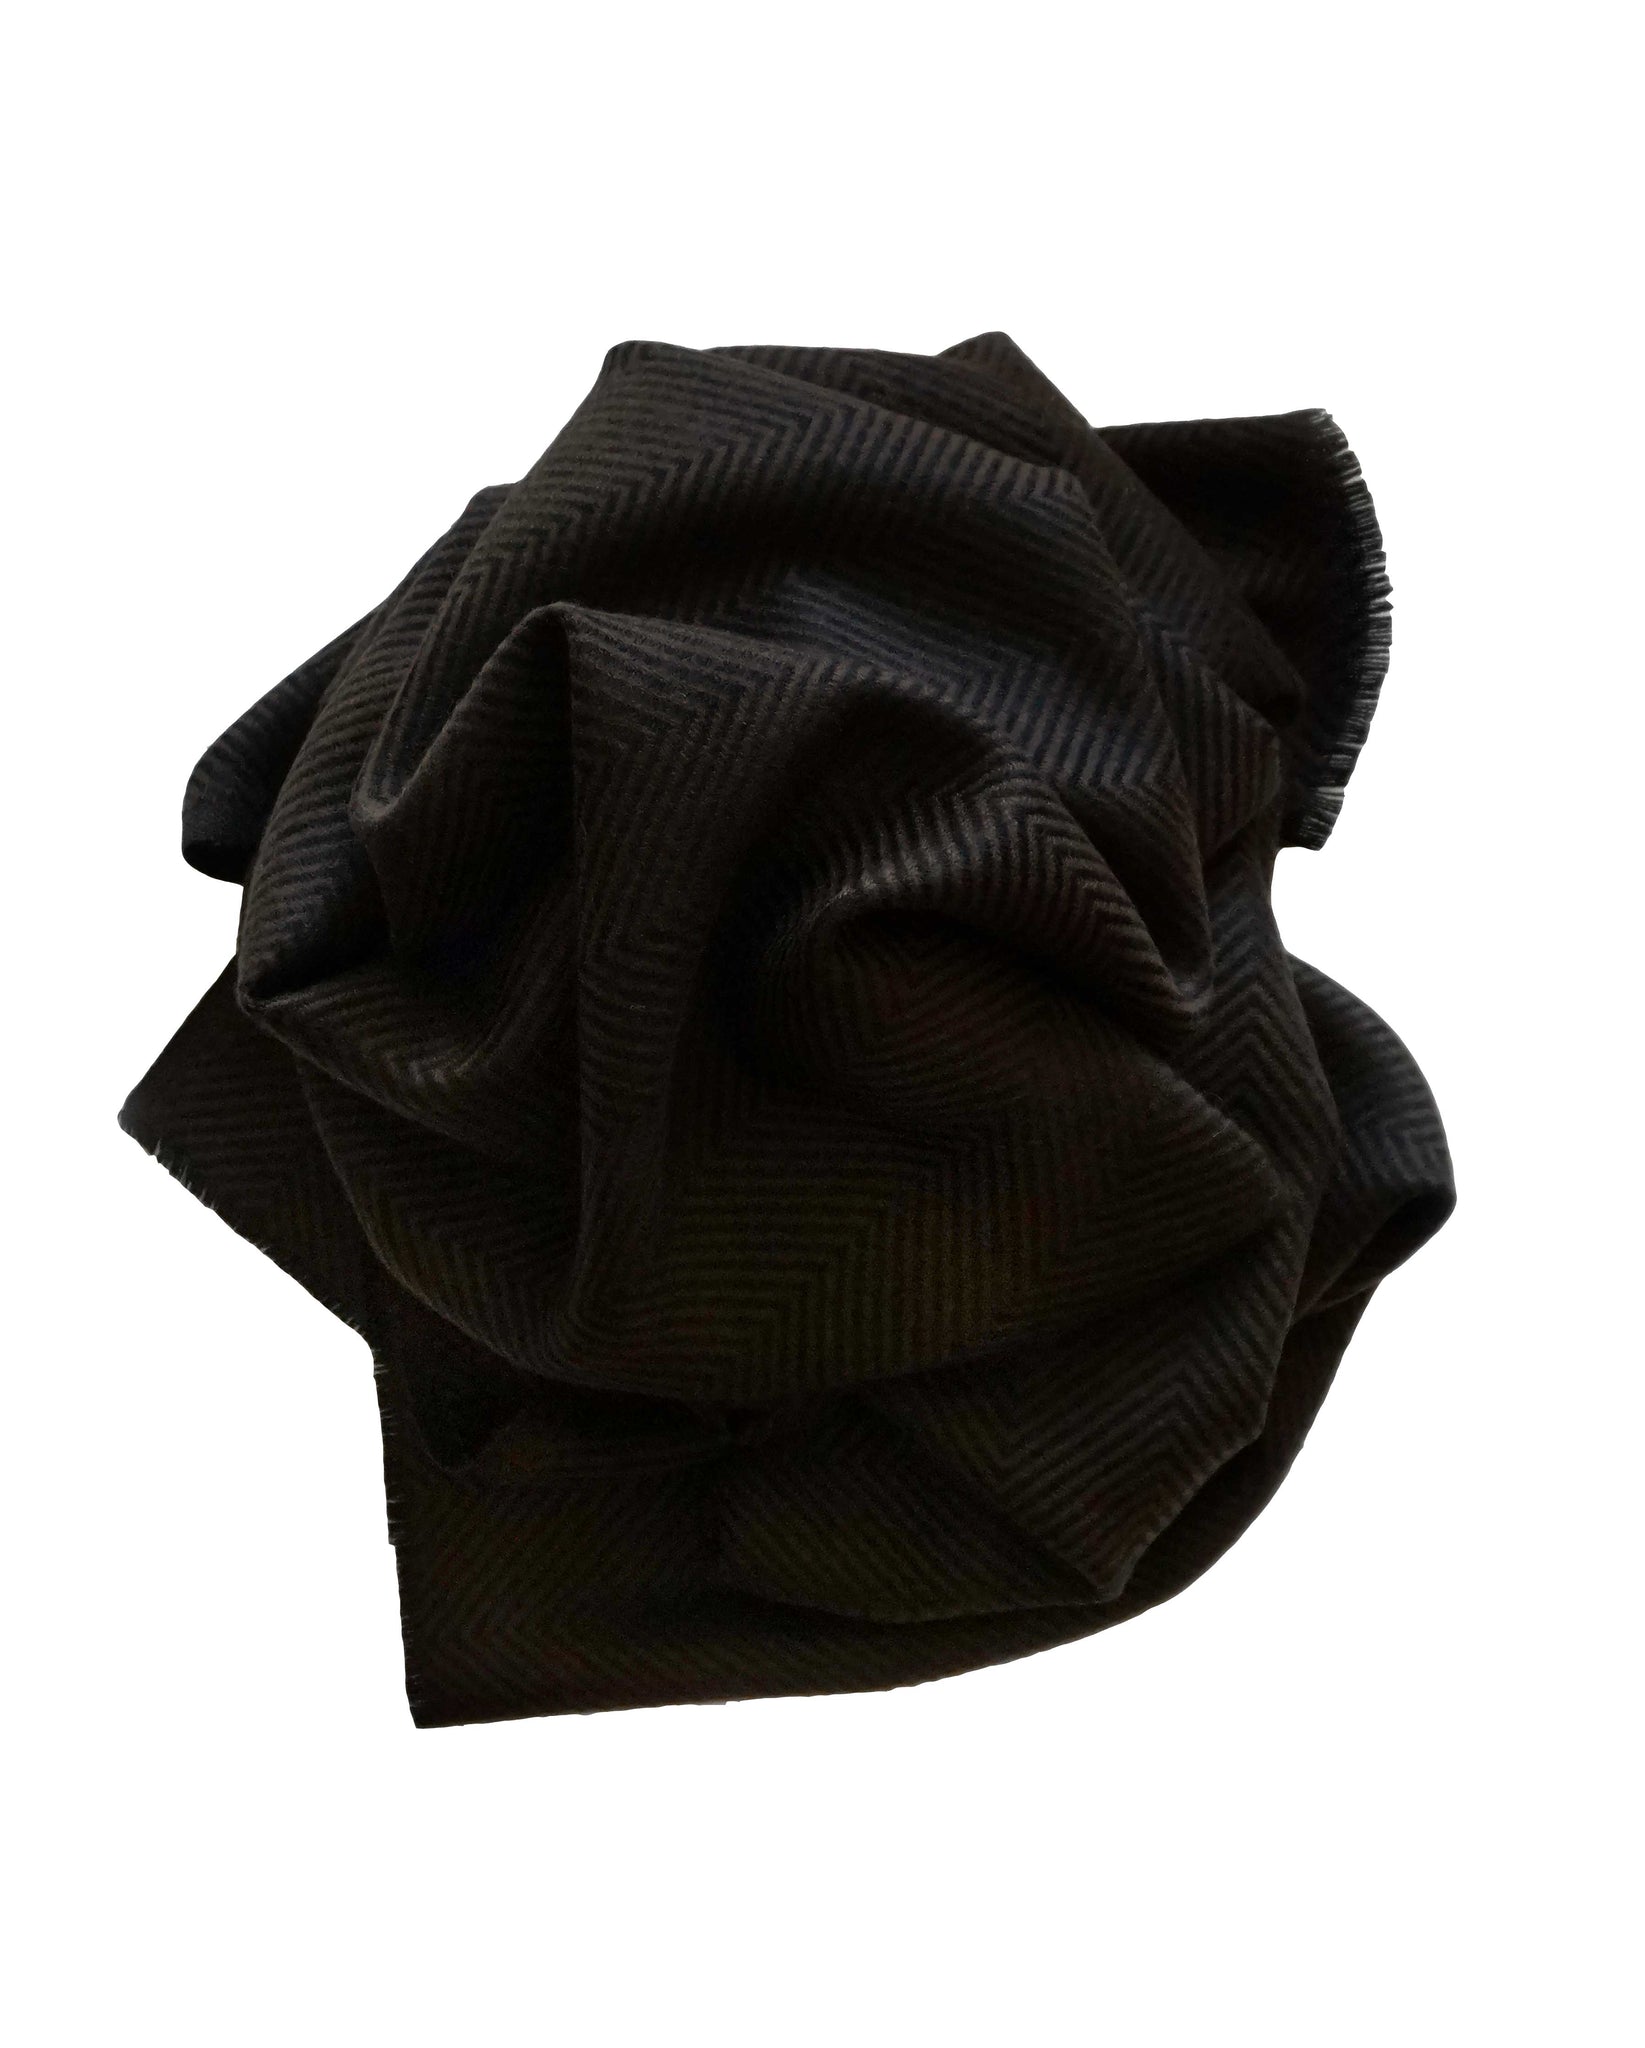 Black and brown handmade chevron woven scarf. A perfect mother’s gift - Marie-Pierre Rousseau